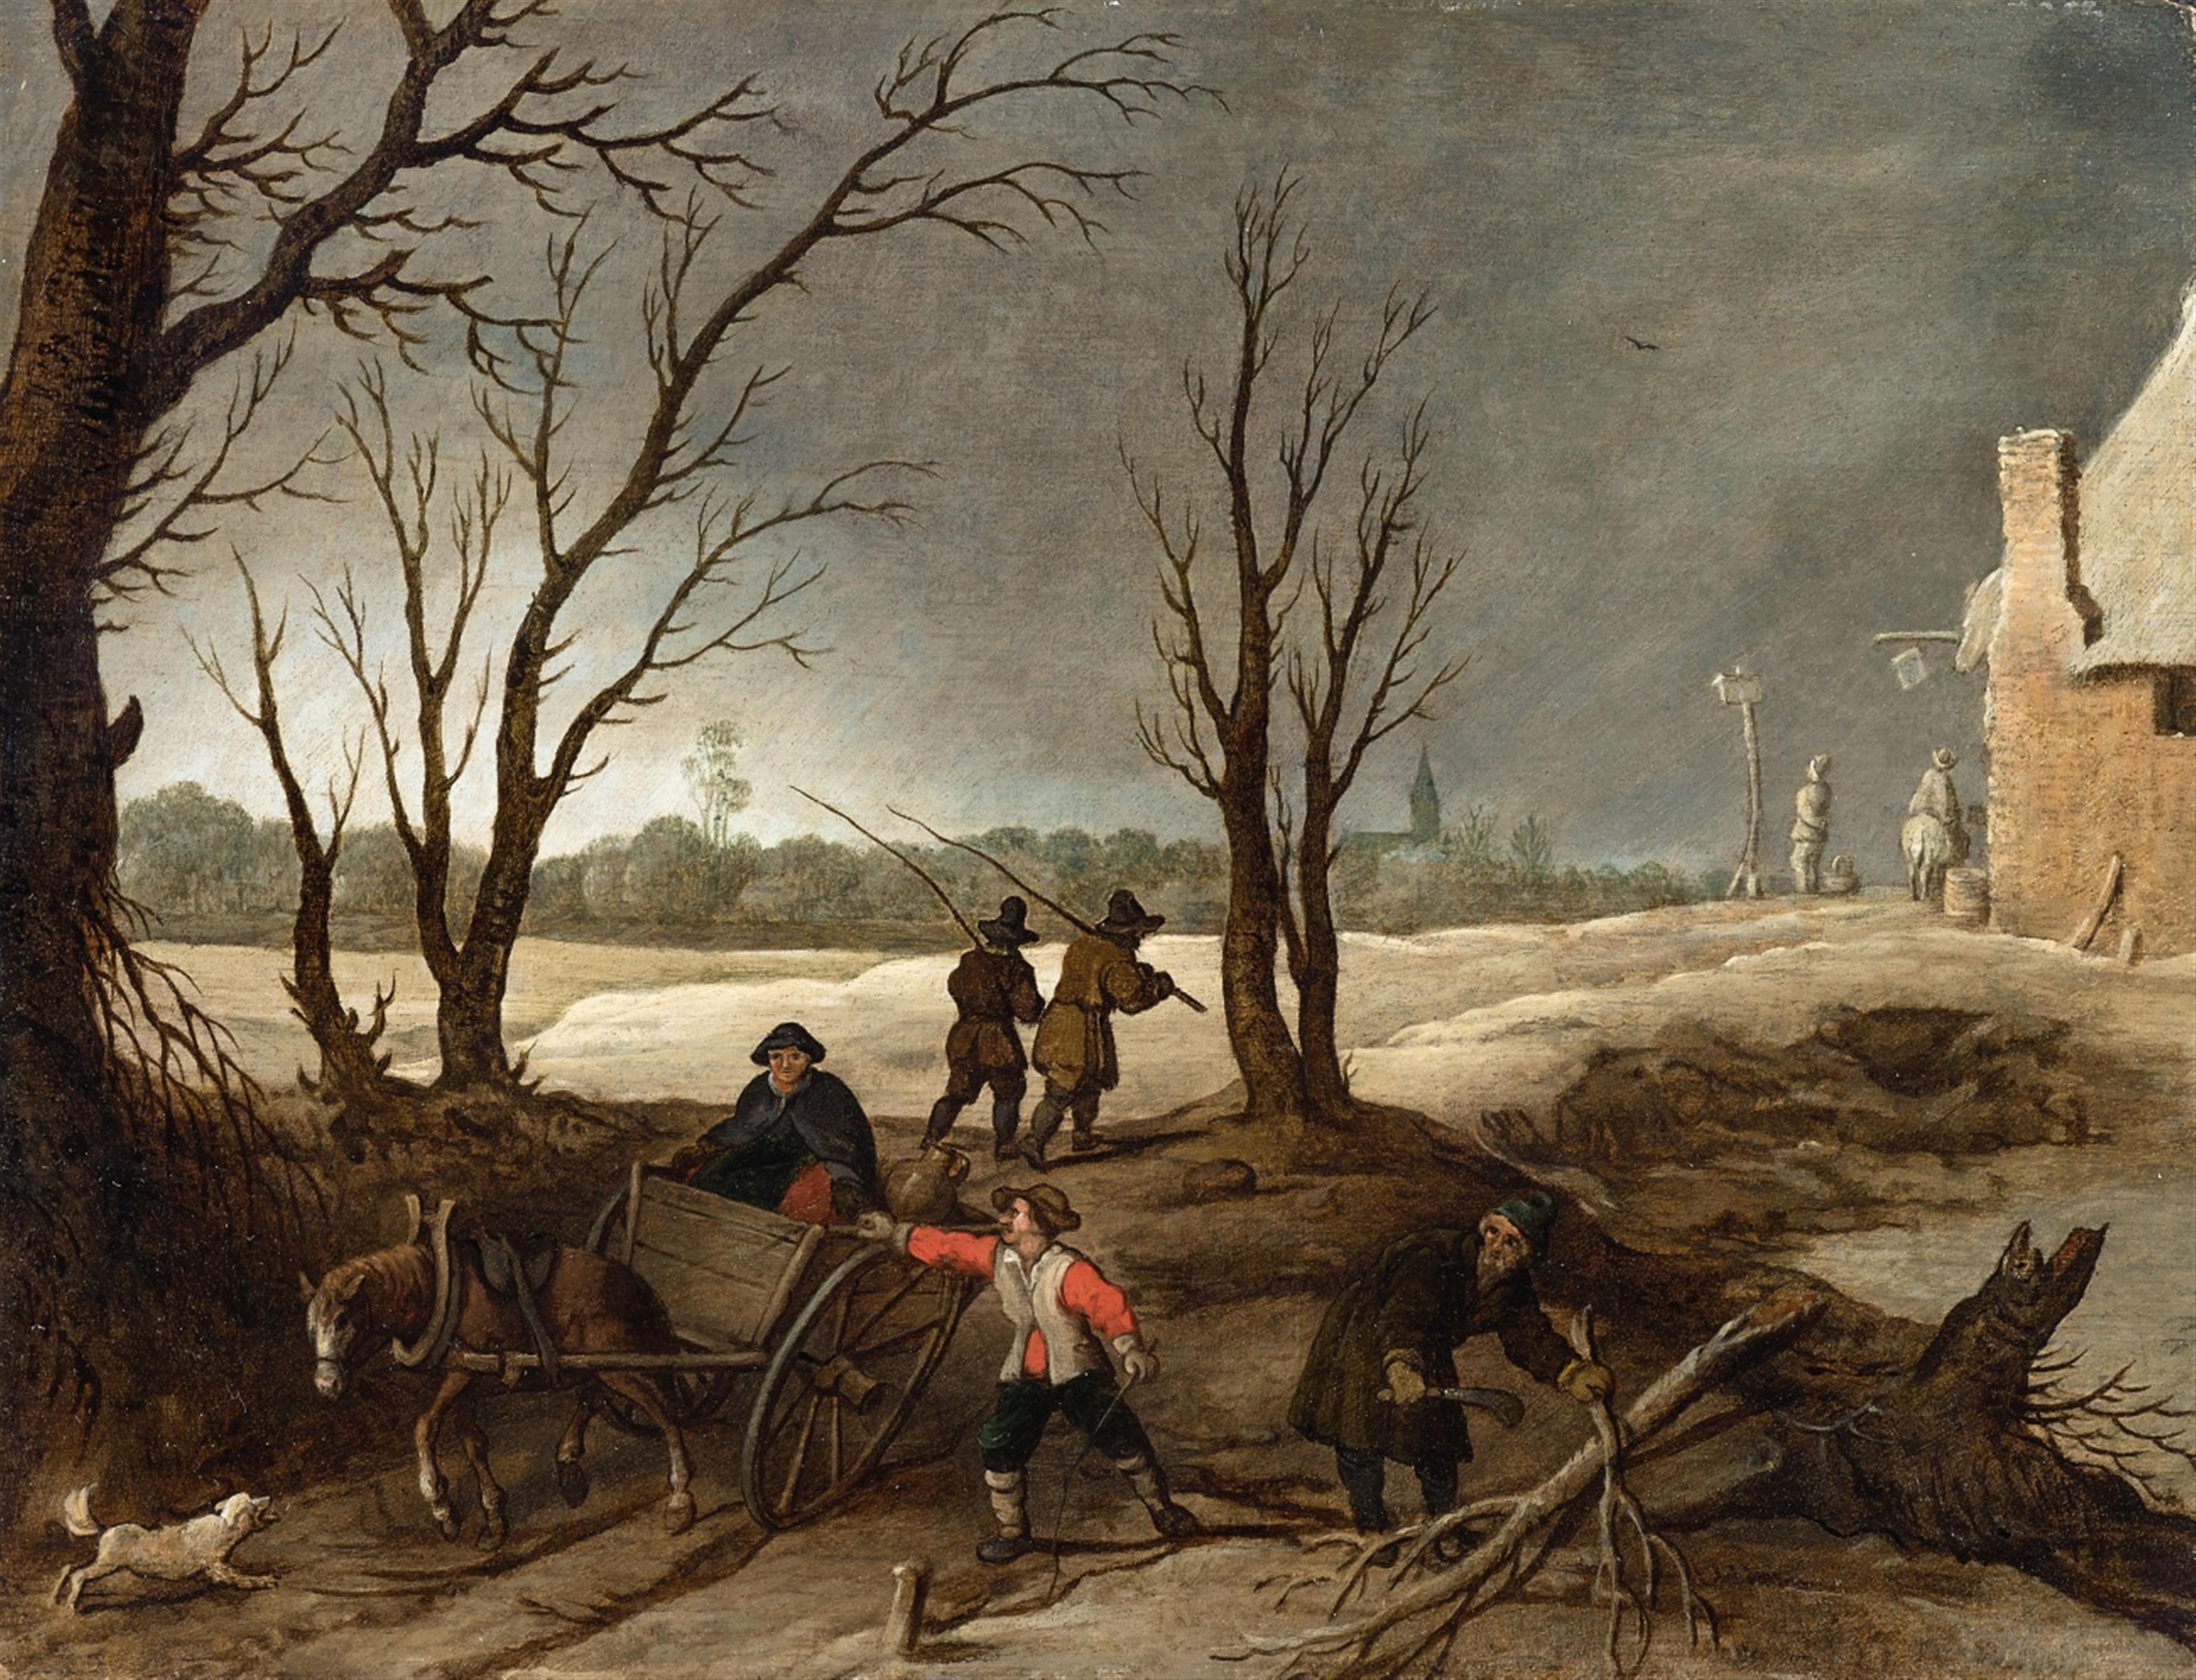 Sebastiaan Vrancx - A Landscape with Woodworkers - image-1